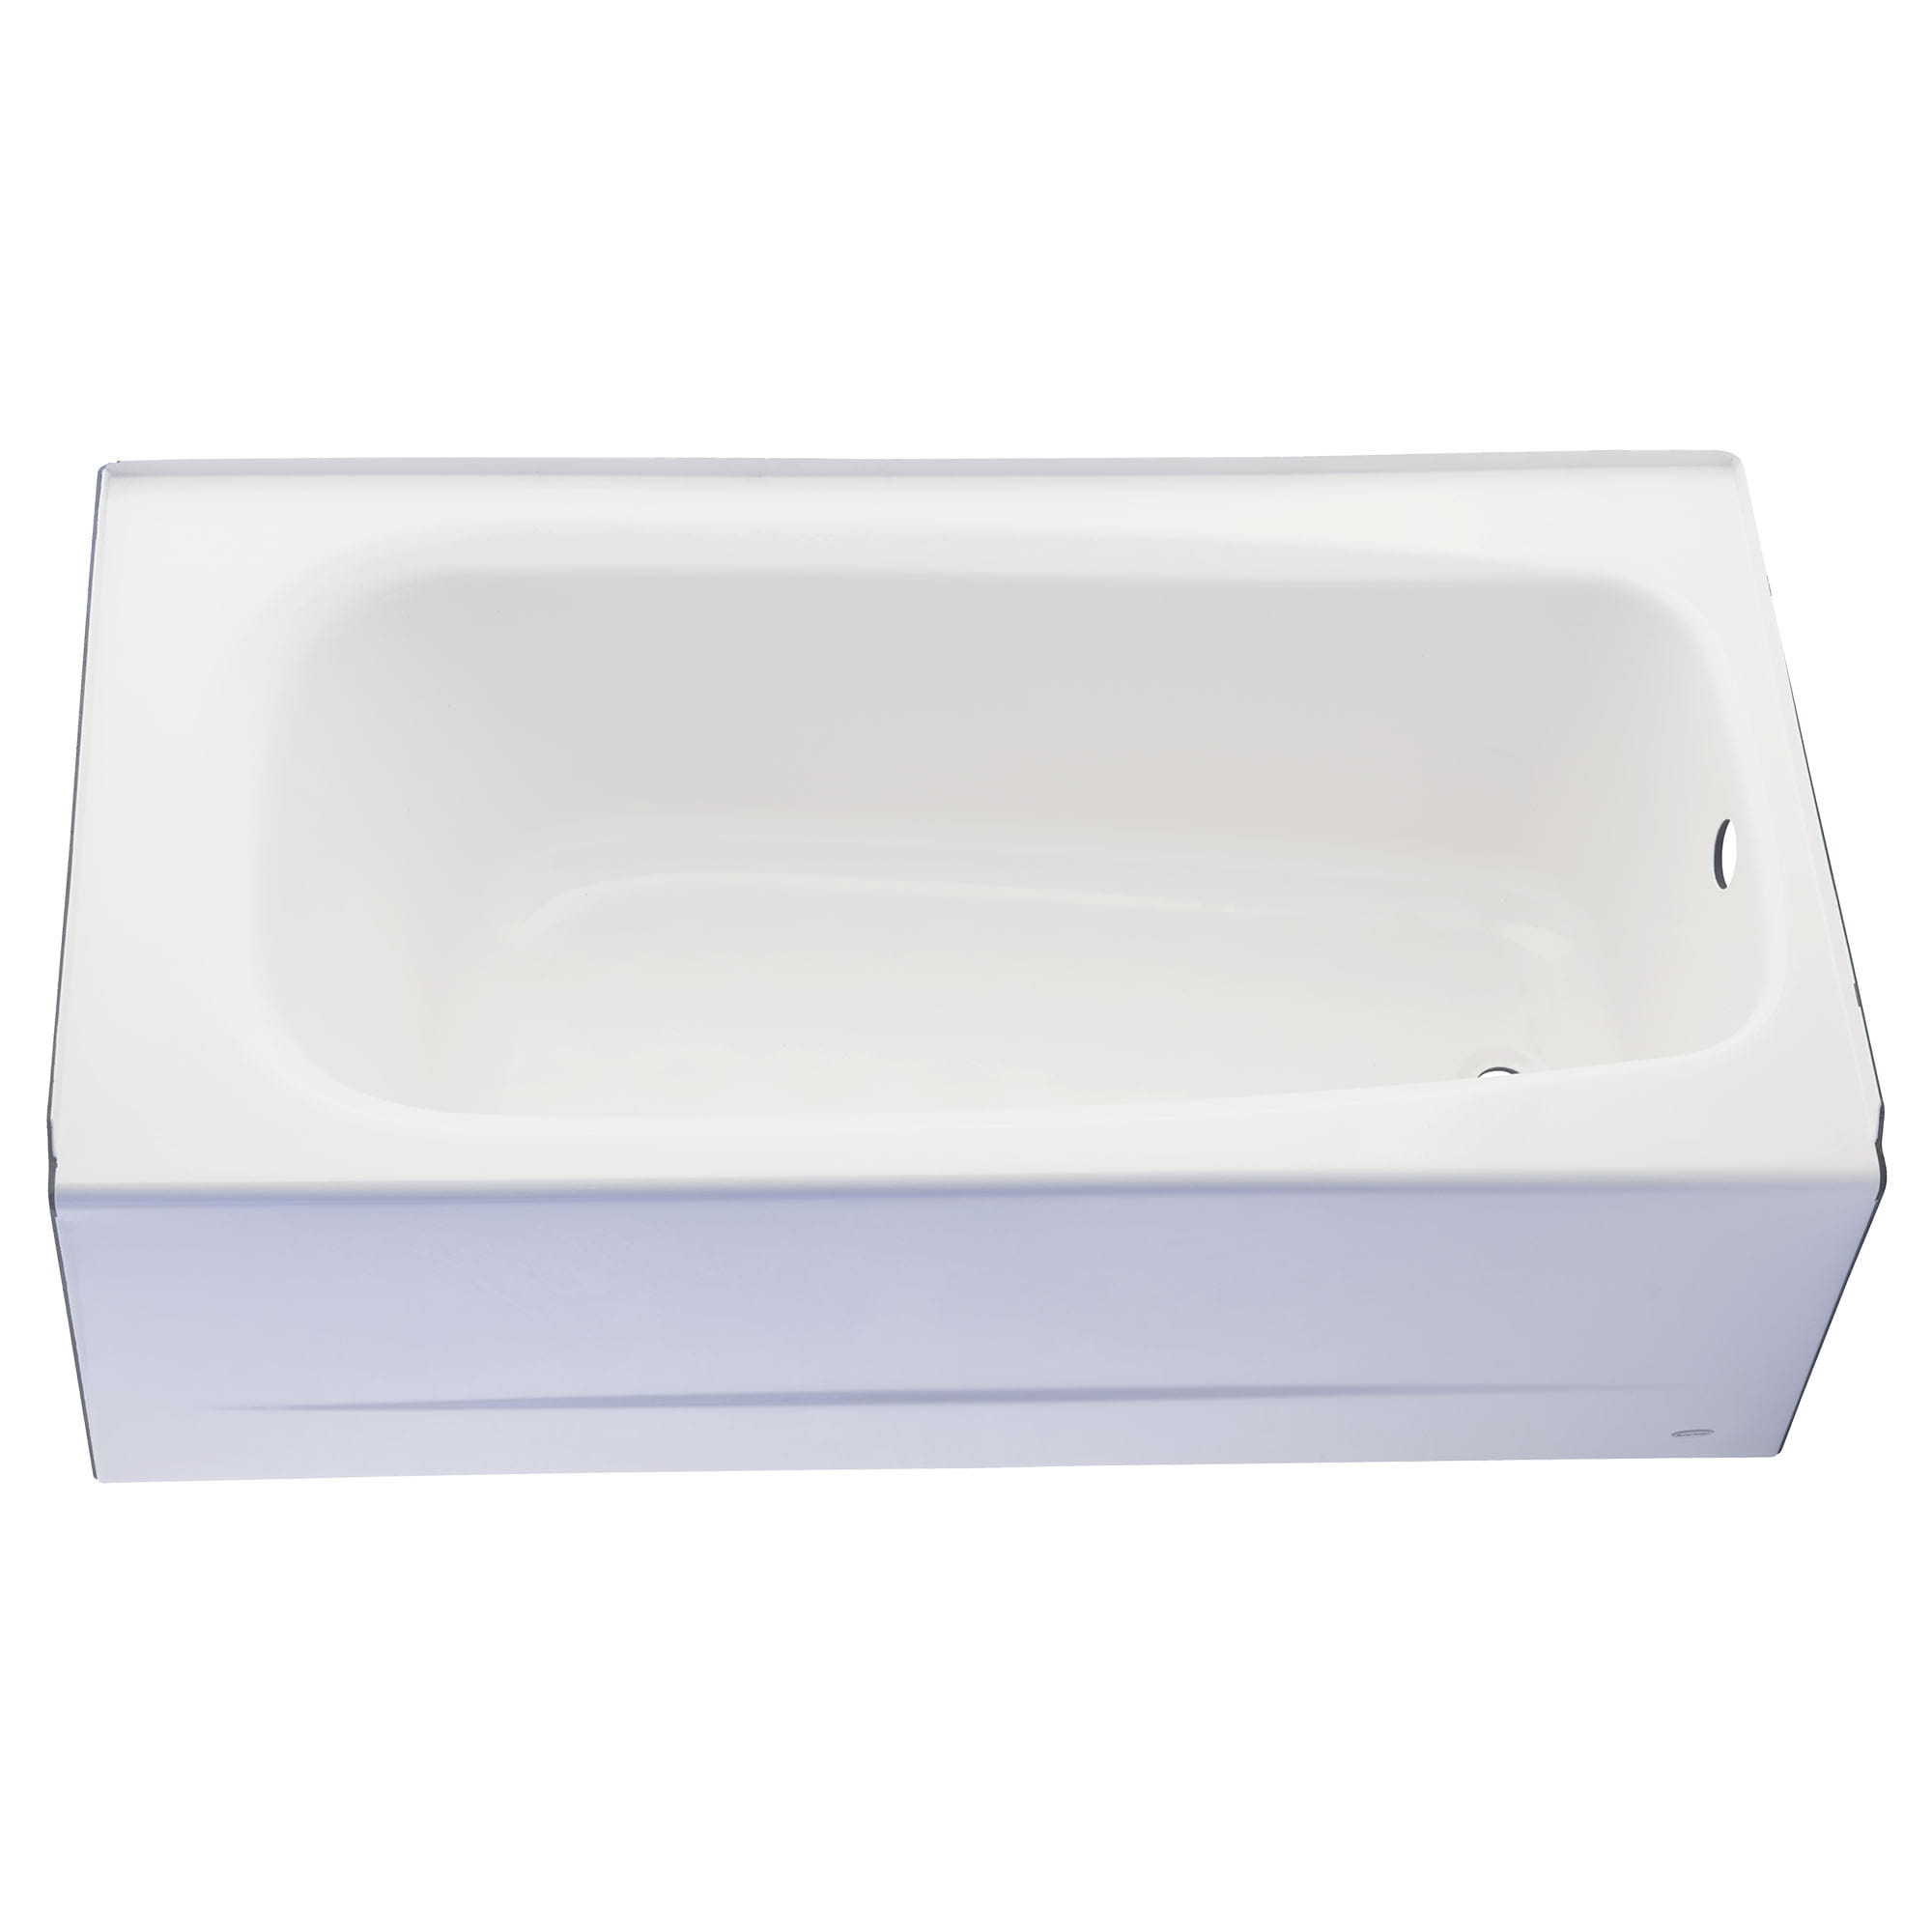 Cambridge Americast 60 x 32 Inch Integral Apron Bathtub With Right Hand Outlet ARCTIC